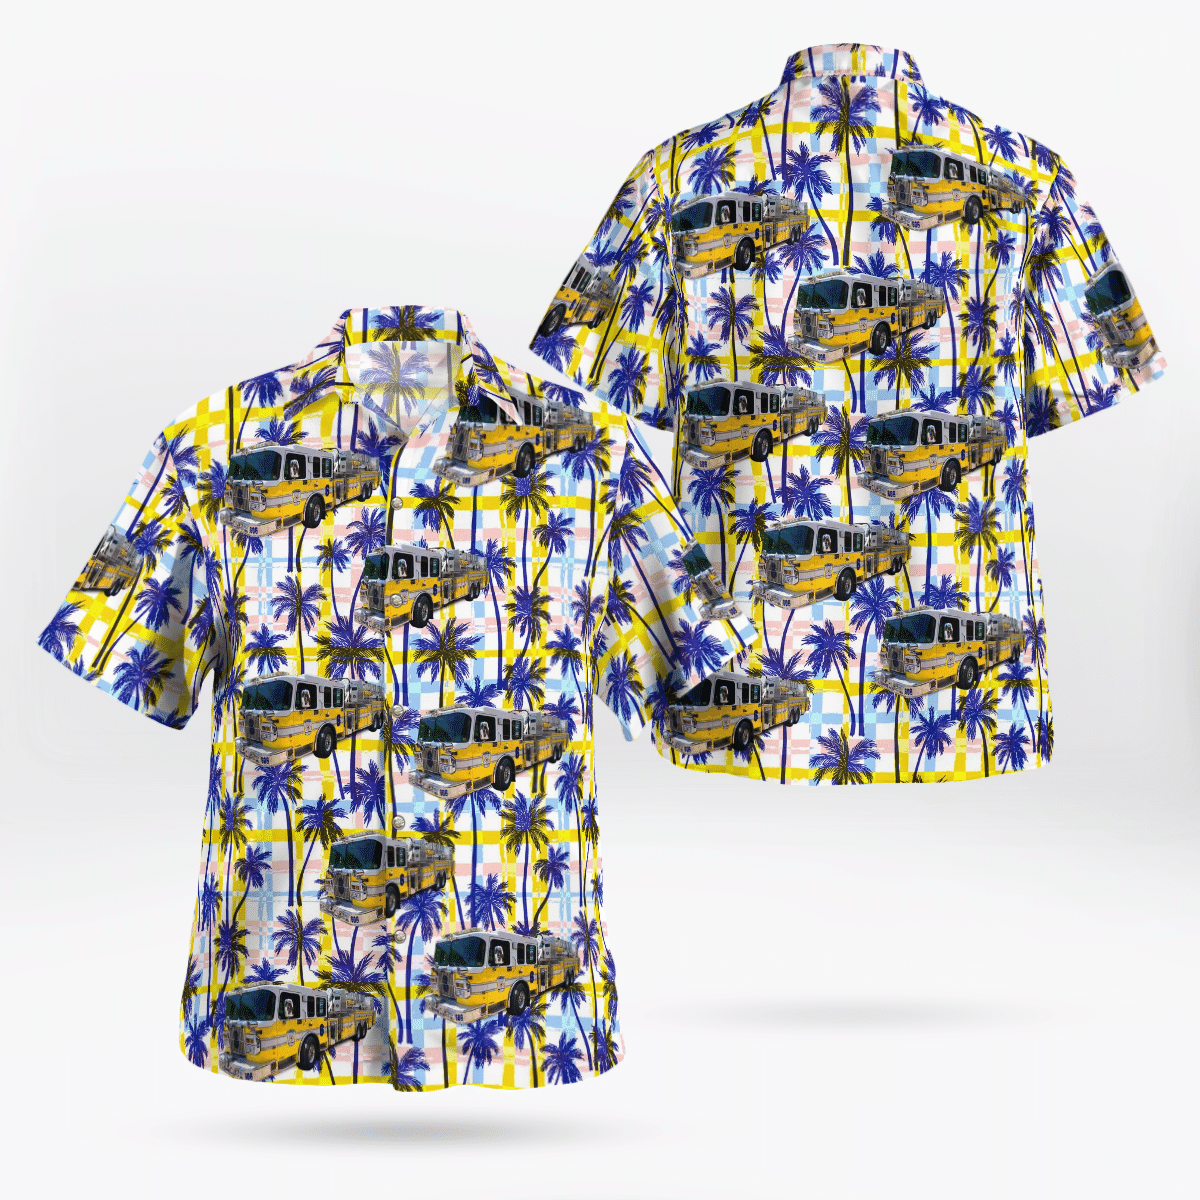 If you are in need of a new summertime look, pick up this Hawaiian shirt 181